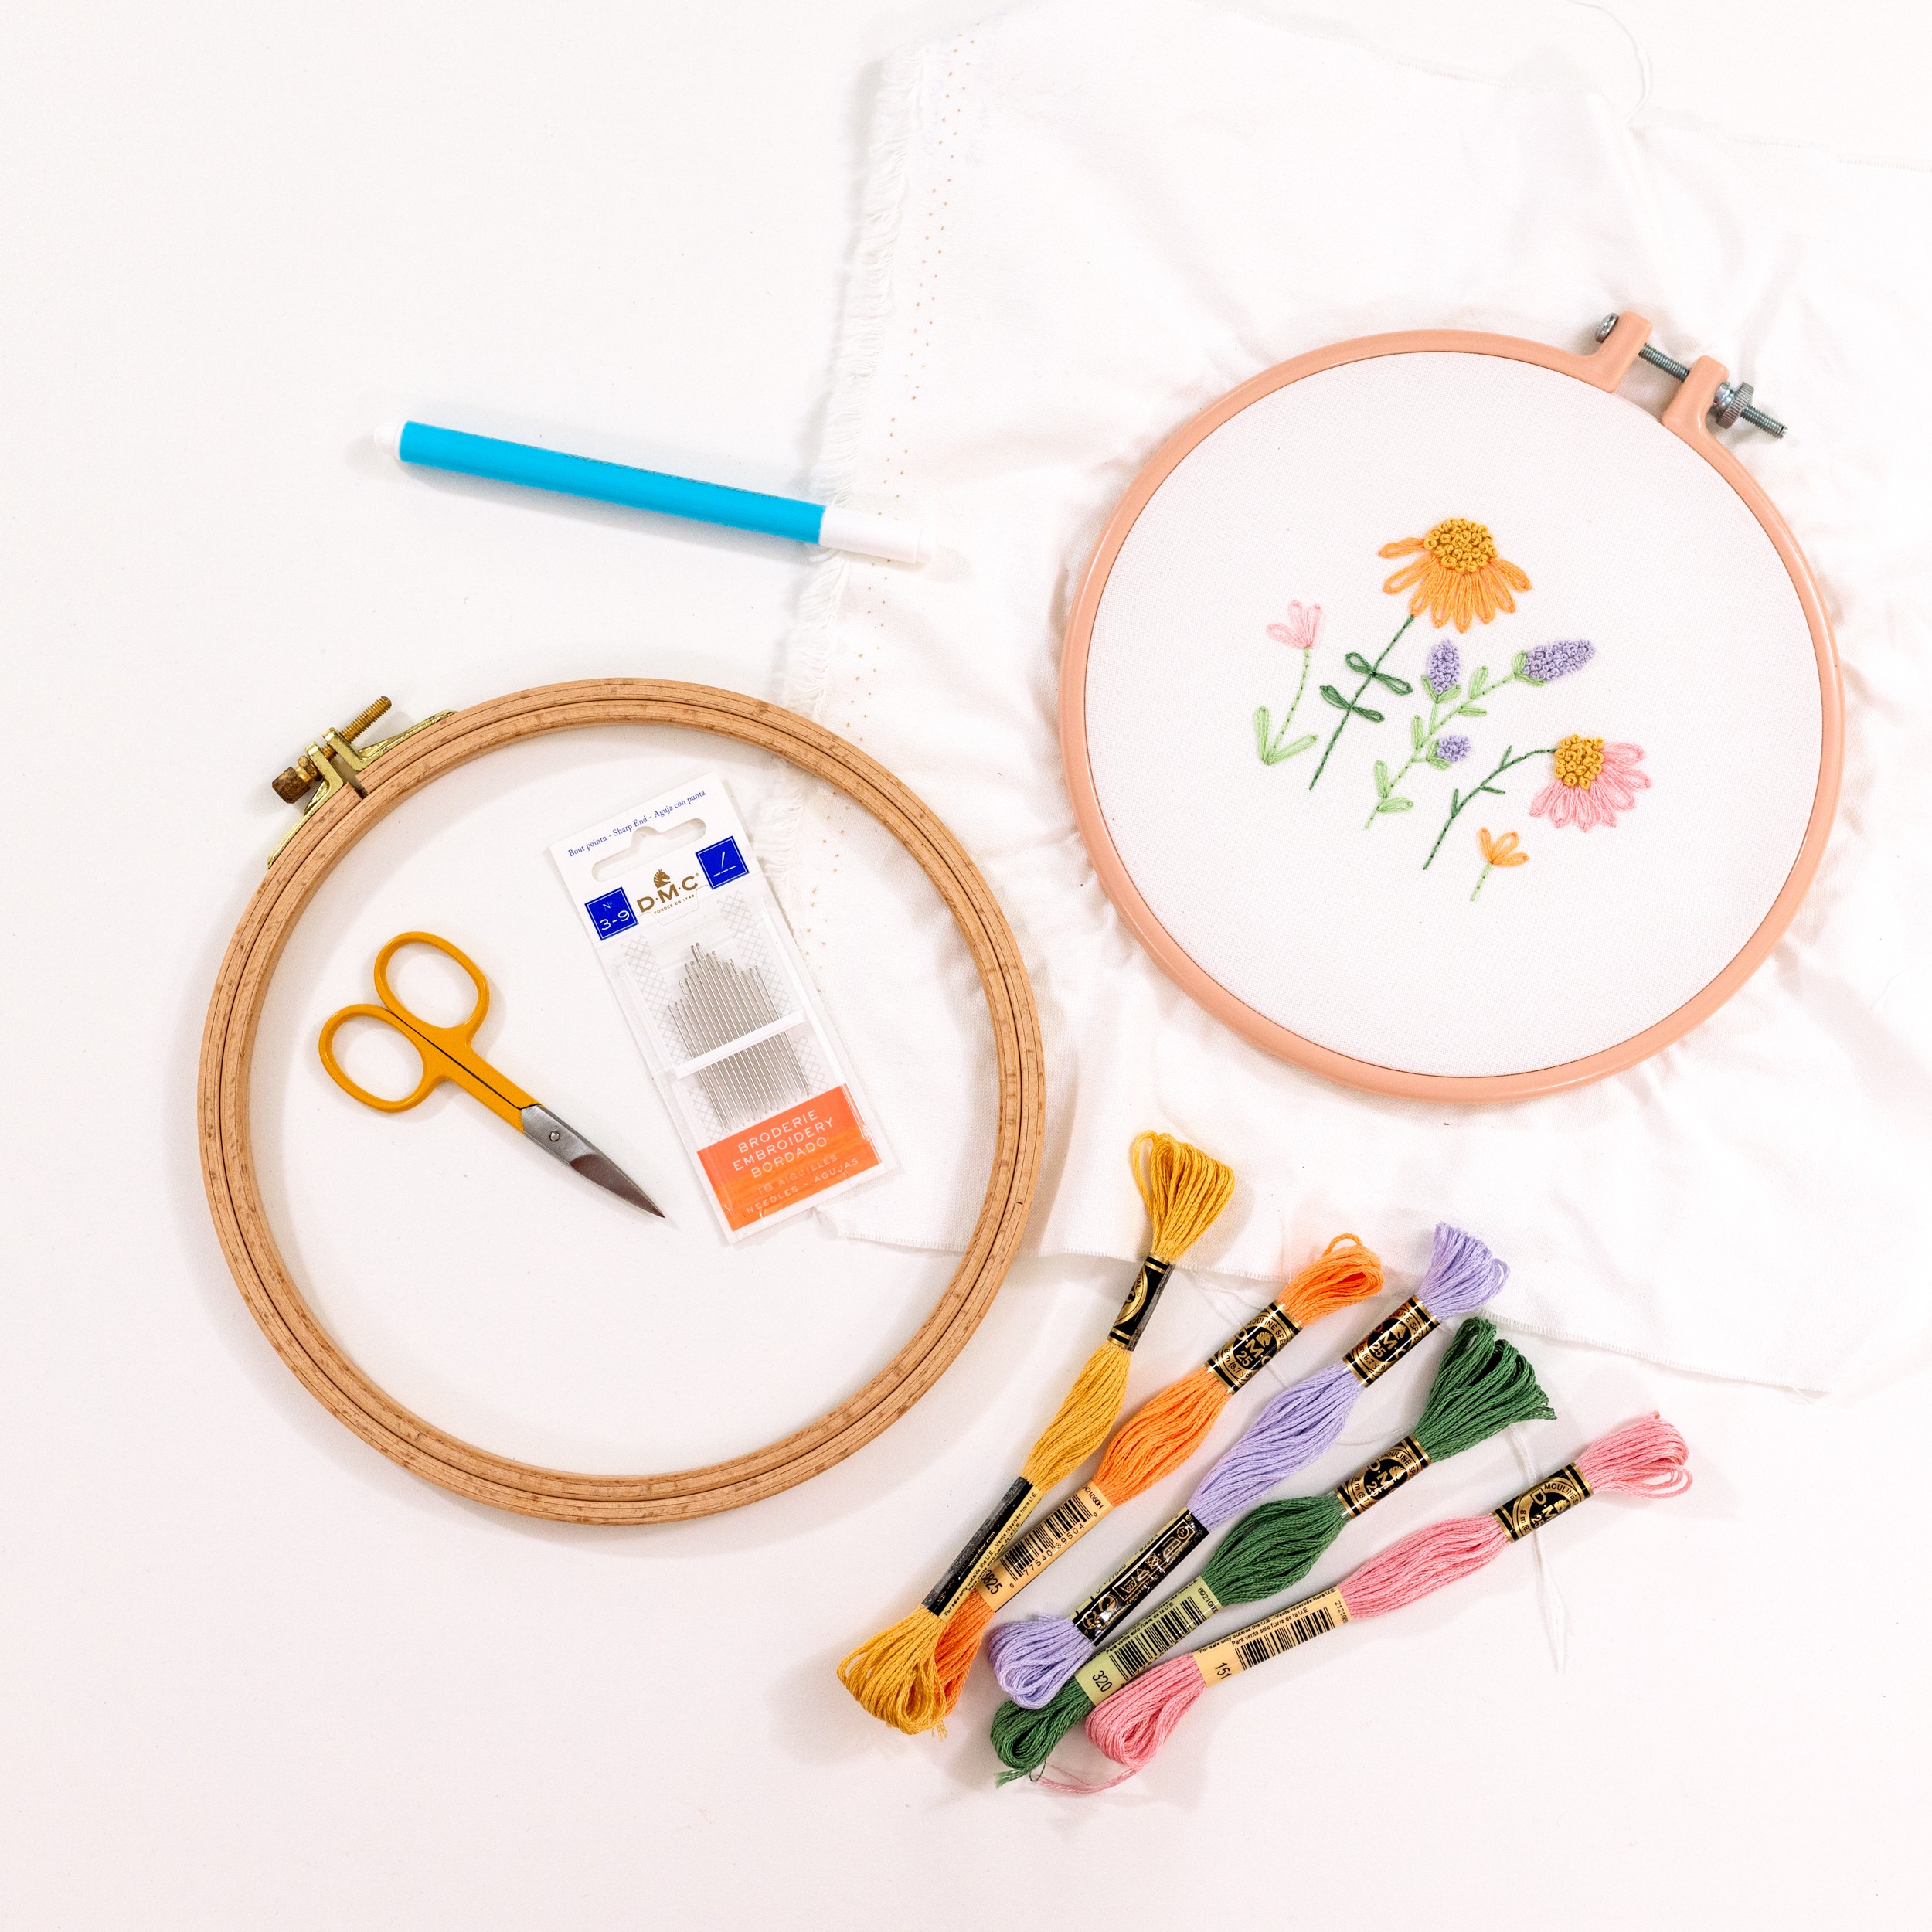 This is and image of a Maker's Academy Five Flowers embroidery pattern with some Clever Poppy Shop embroidery supplies in the background, available for purchase from the Clever Poppy Shop.